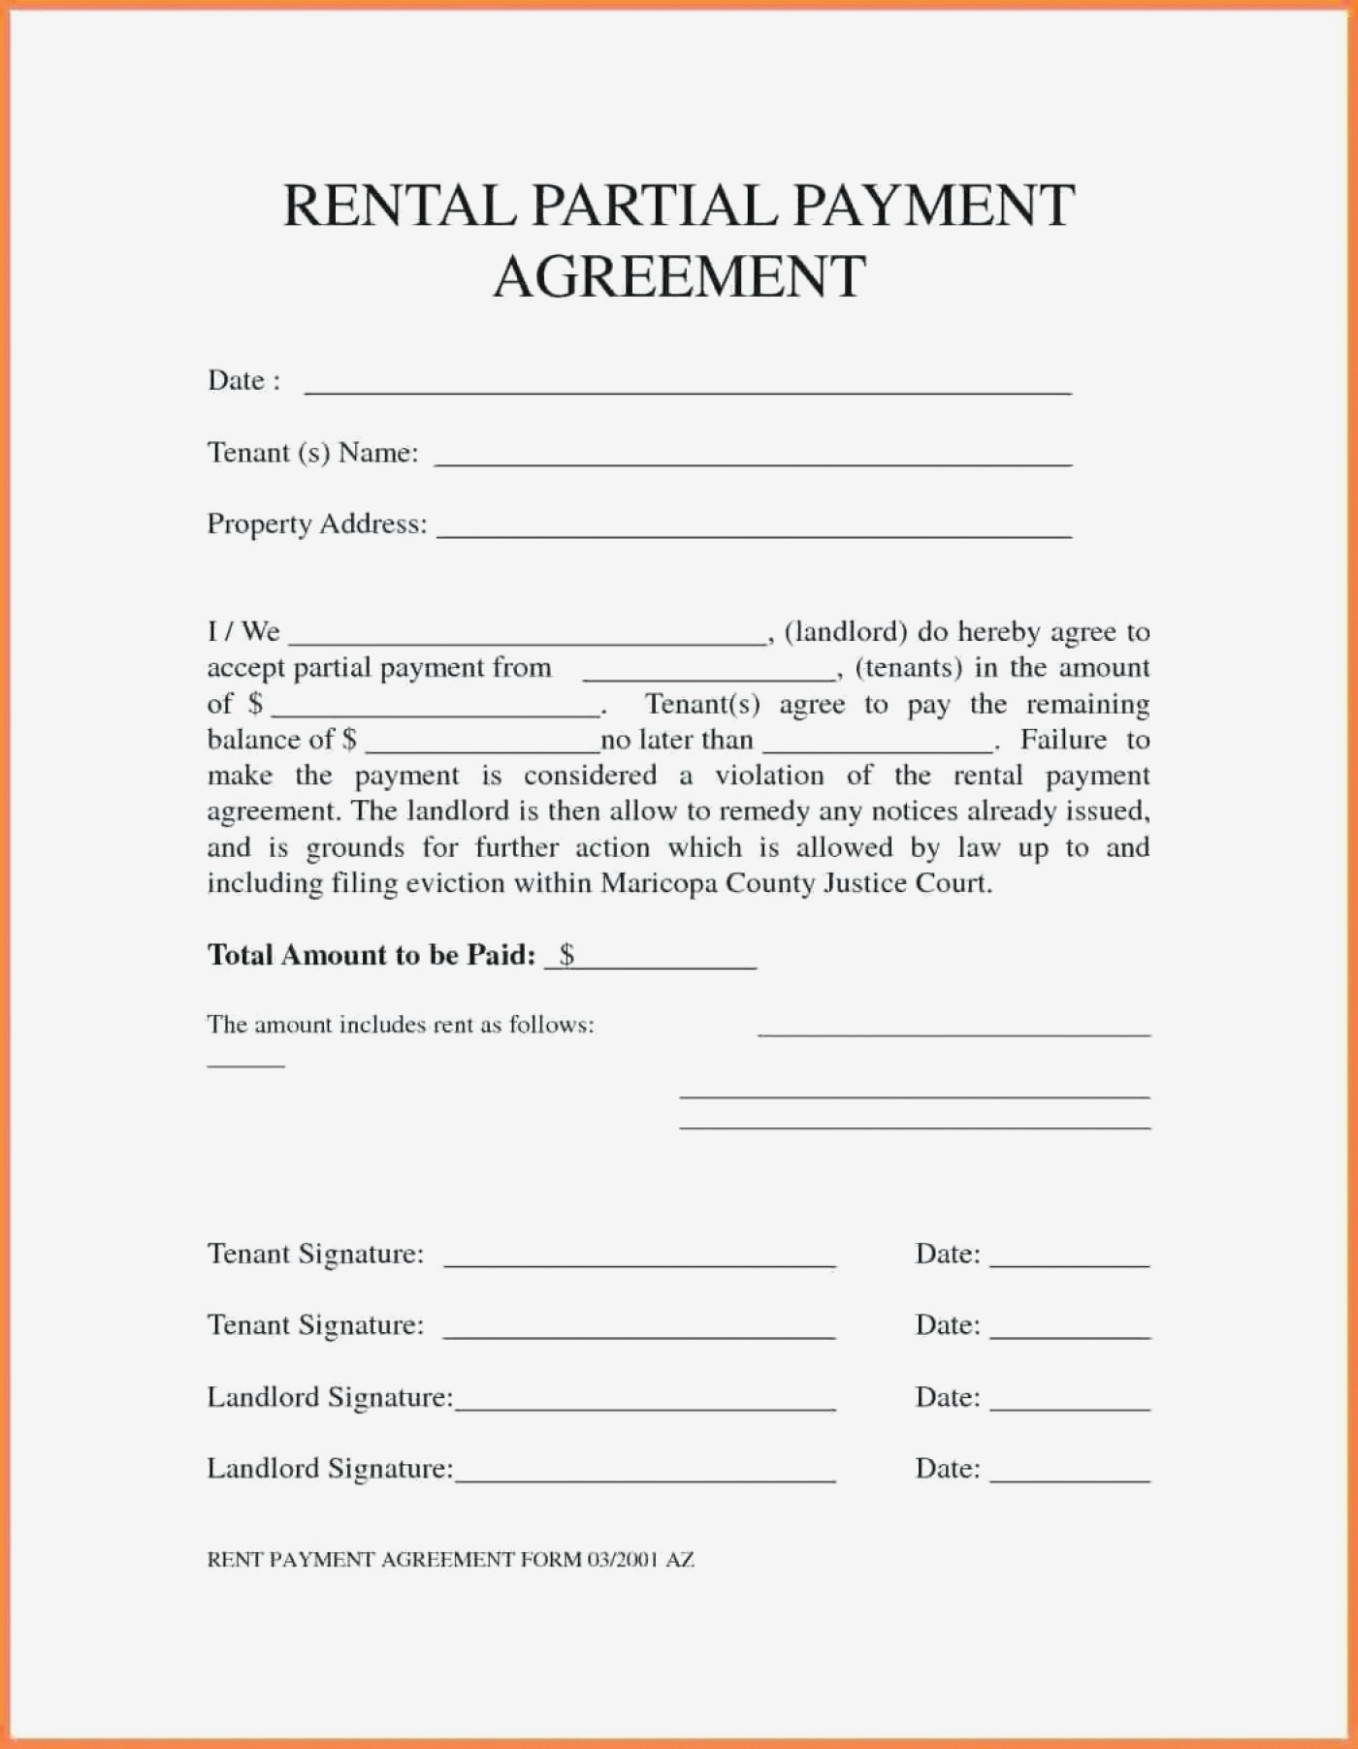 Form Templates Free Blank Legal Forms Spreadsheet Marvelous - Free Legal Forms Online Printable